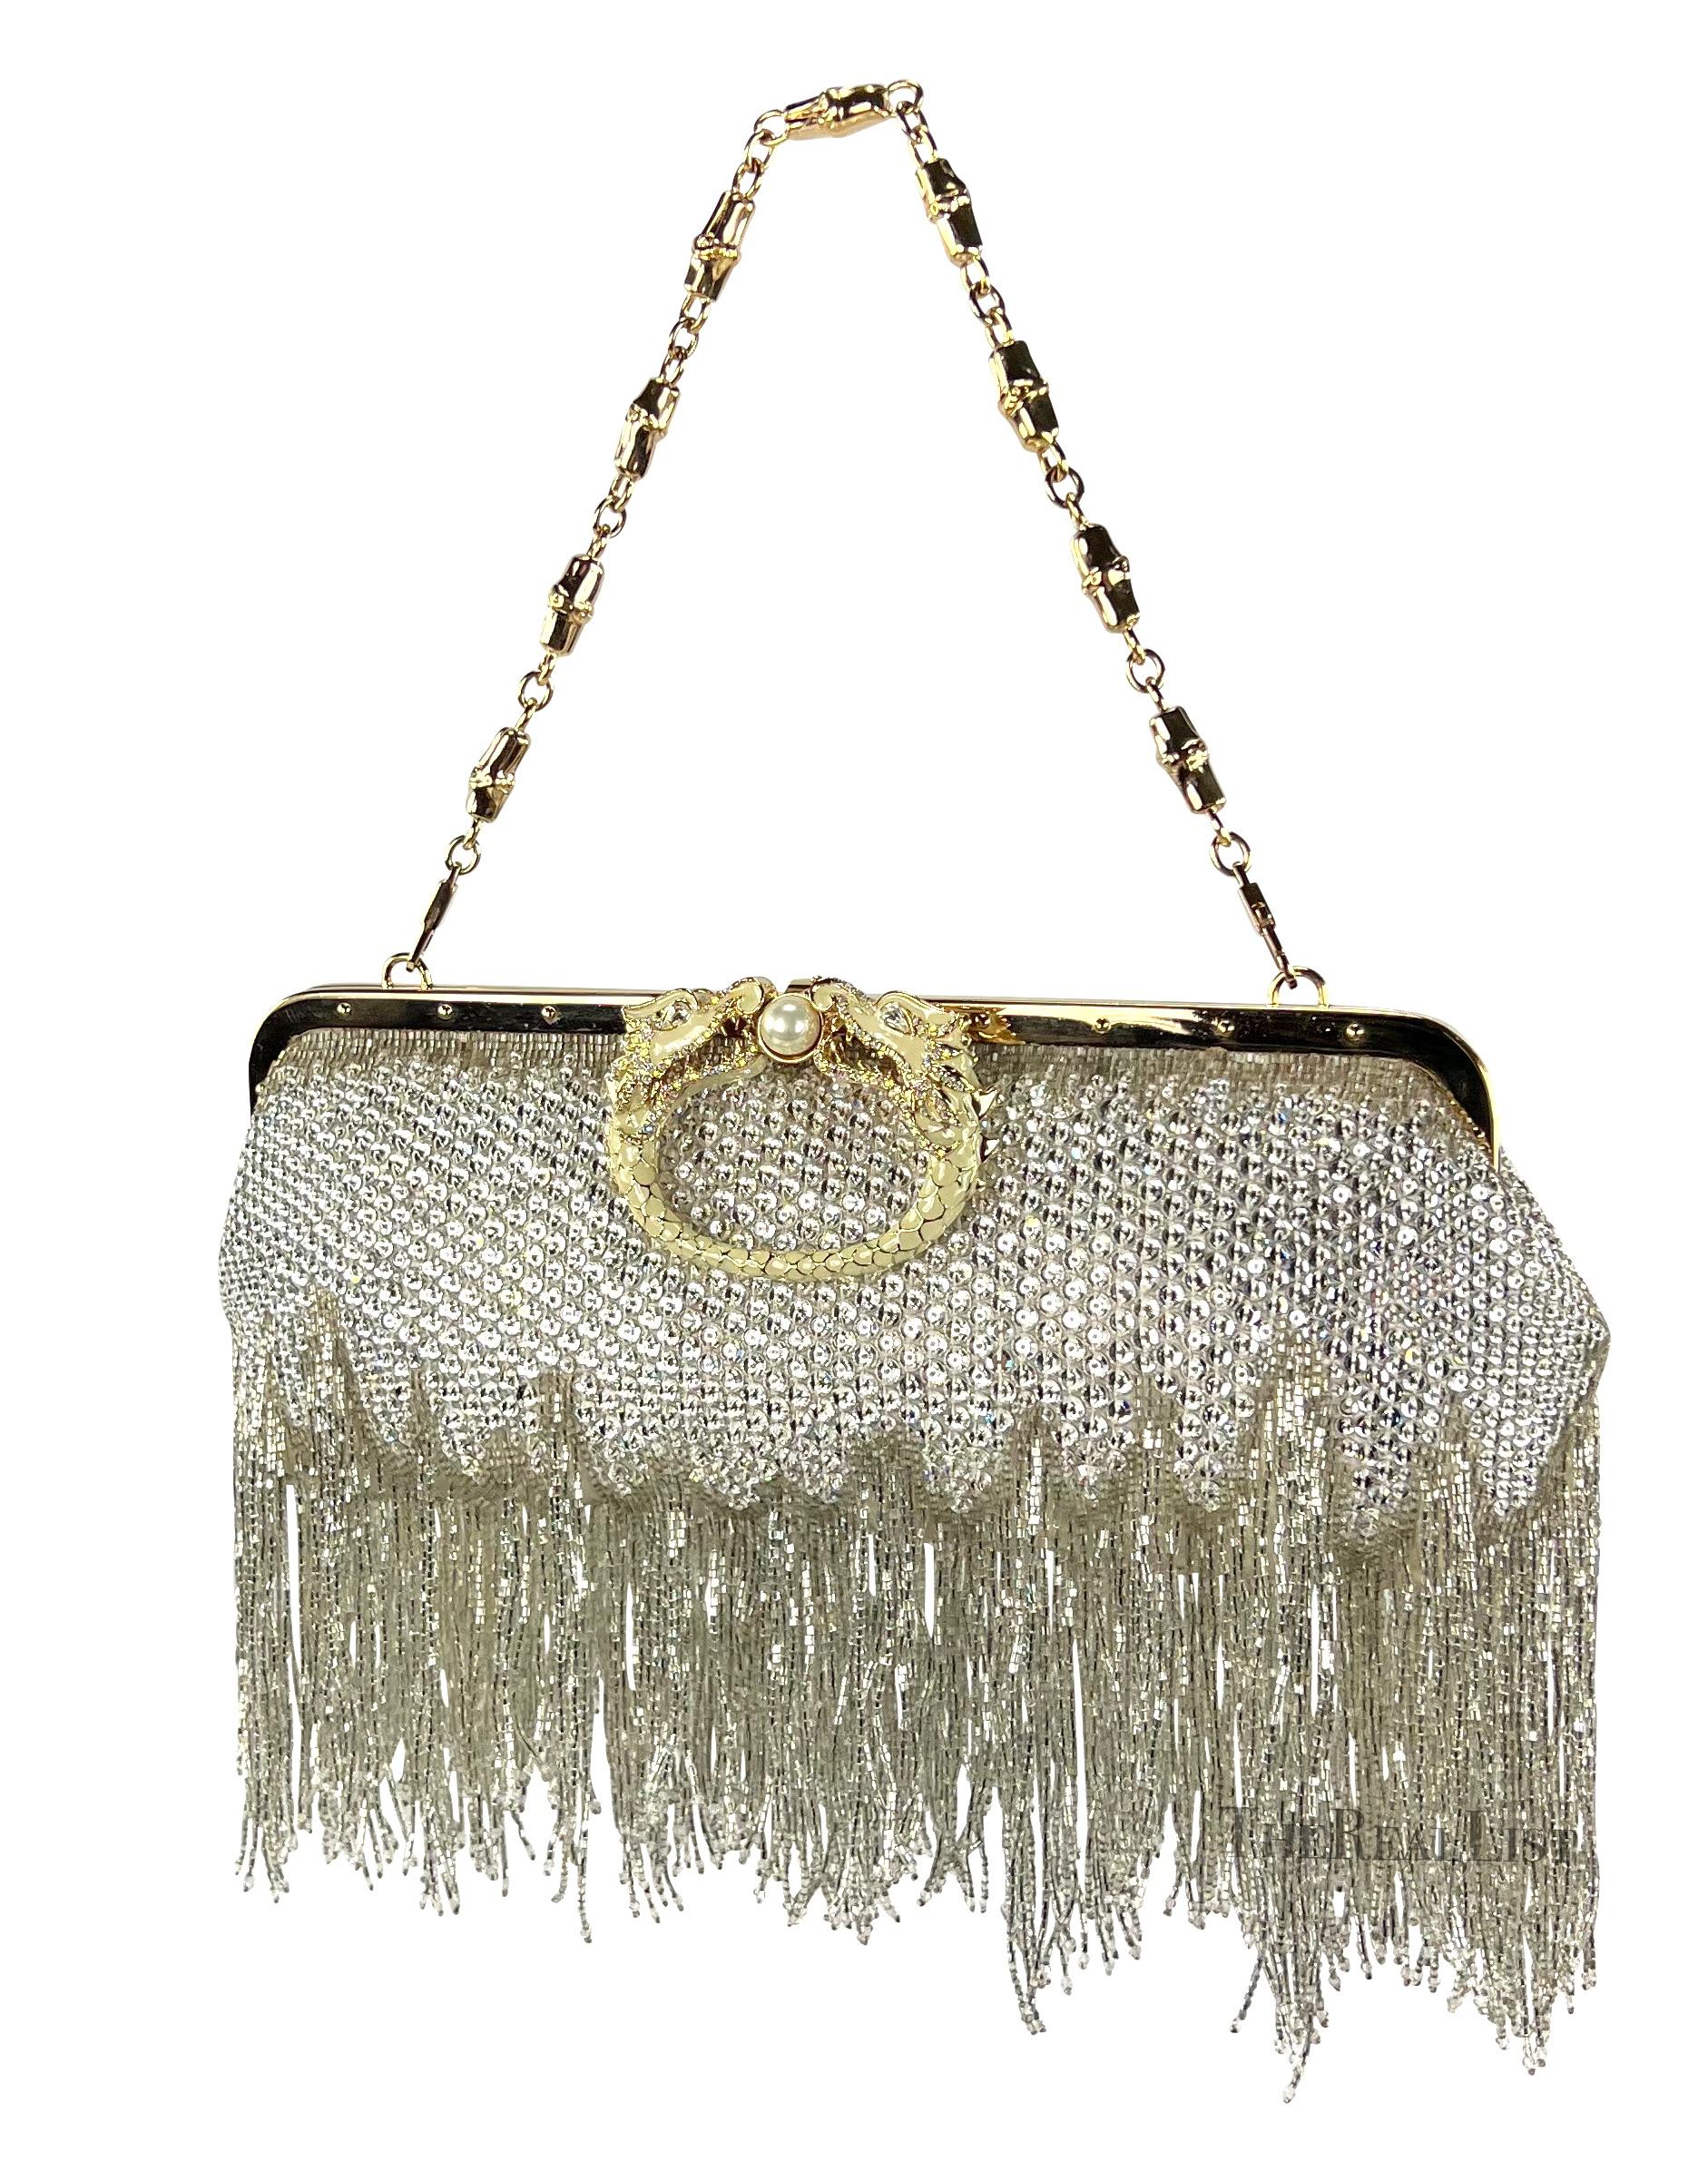 TheRealList presents: an incredible crystal beaded and rhinestone accented Gucci bag, designed by Tom Ford. Experience timeless luxury with a mesmerizing masterpiece from Ford's final collection at the house of Gucci. This extraordinary Fall/Winter